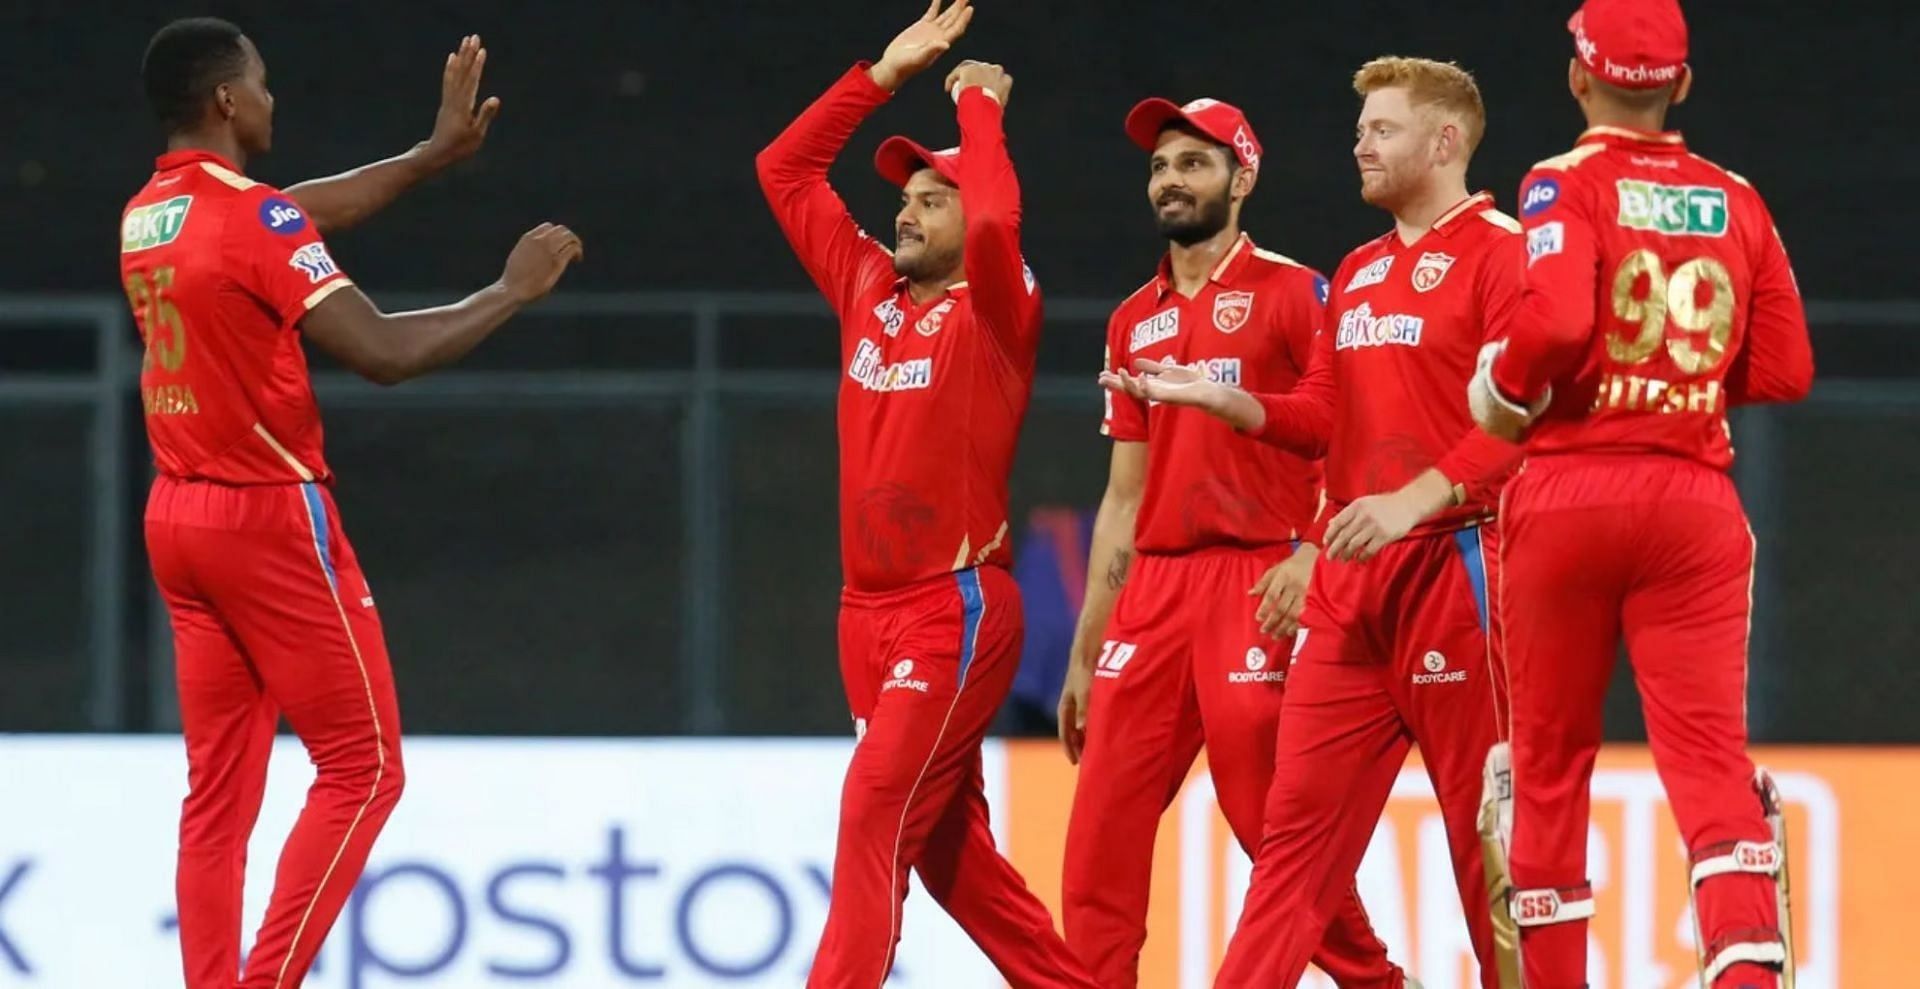 The Punjab Kings have a depleted overseas contingent heading into their IPL 2023 opener. [P/C: iplt20.com]